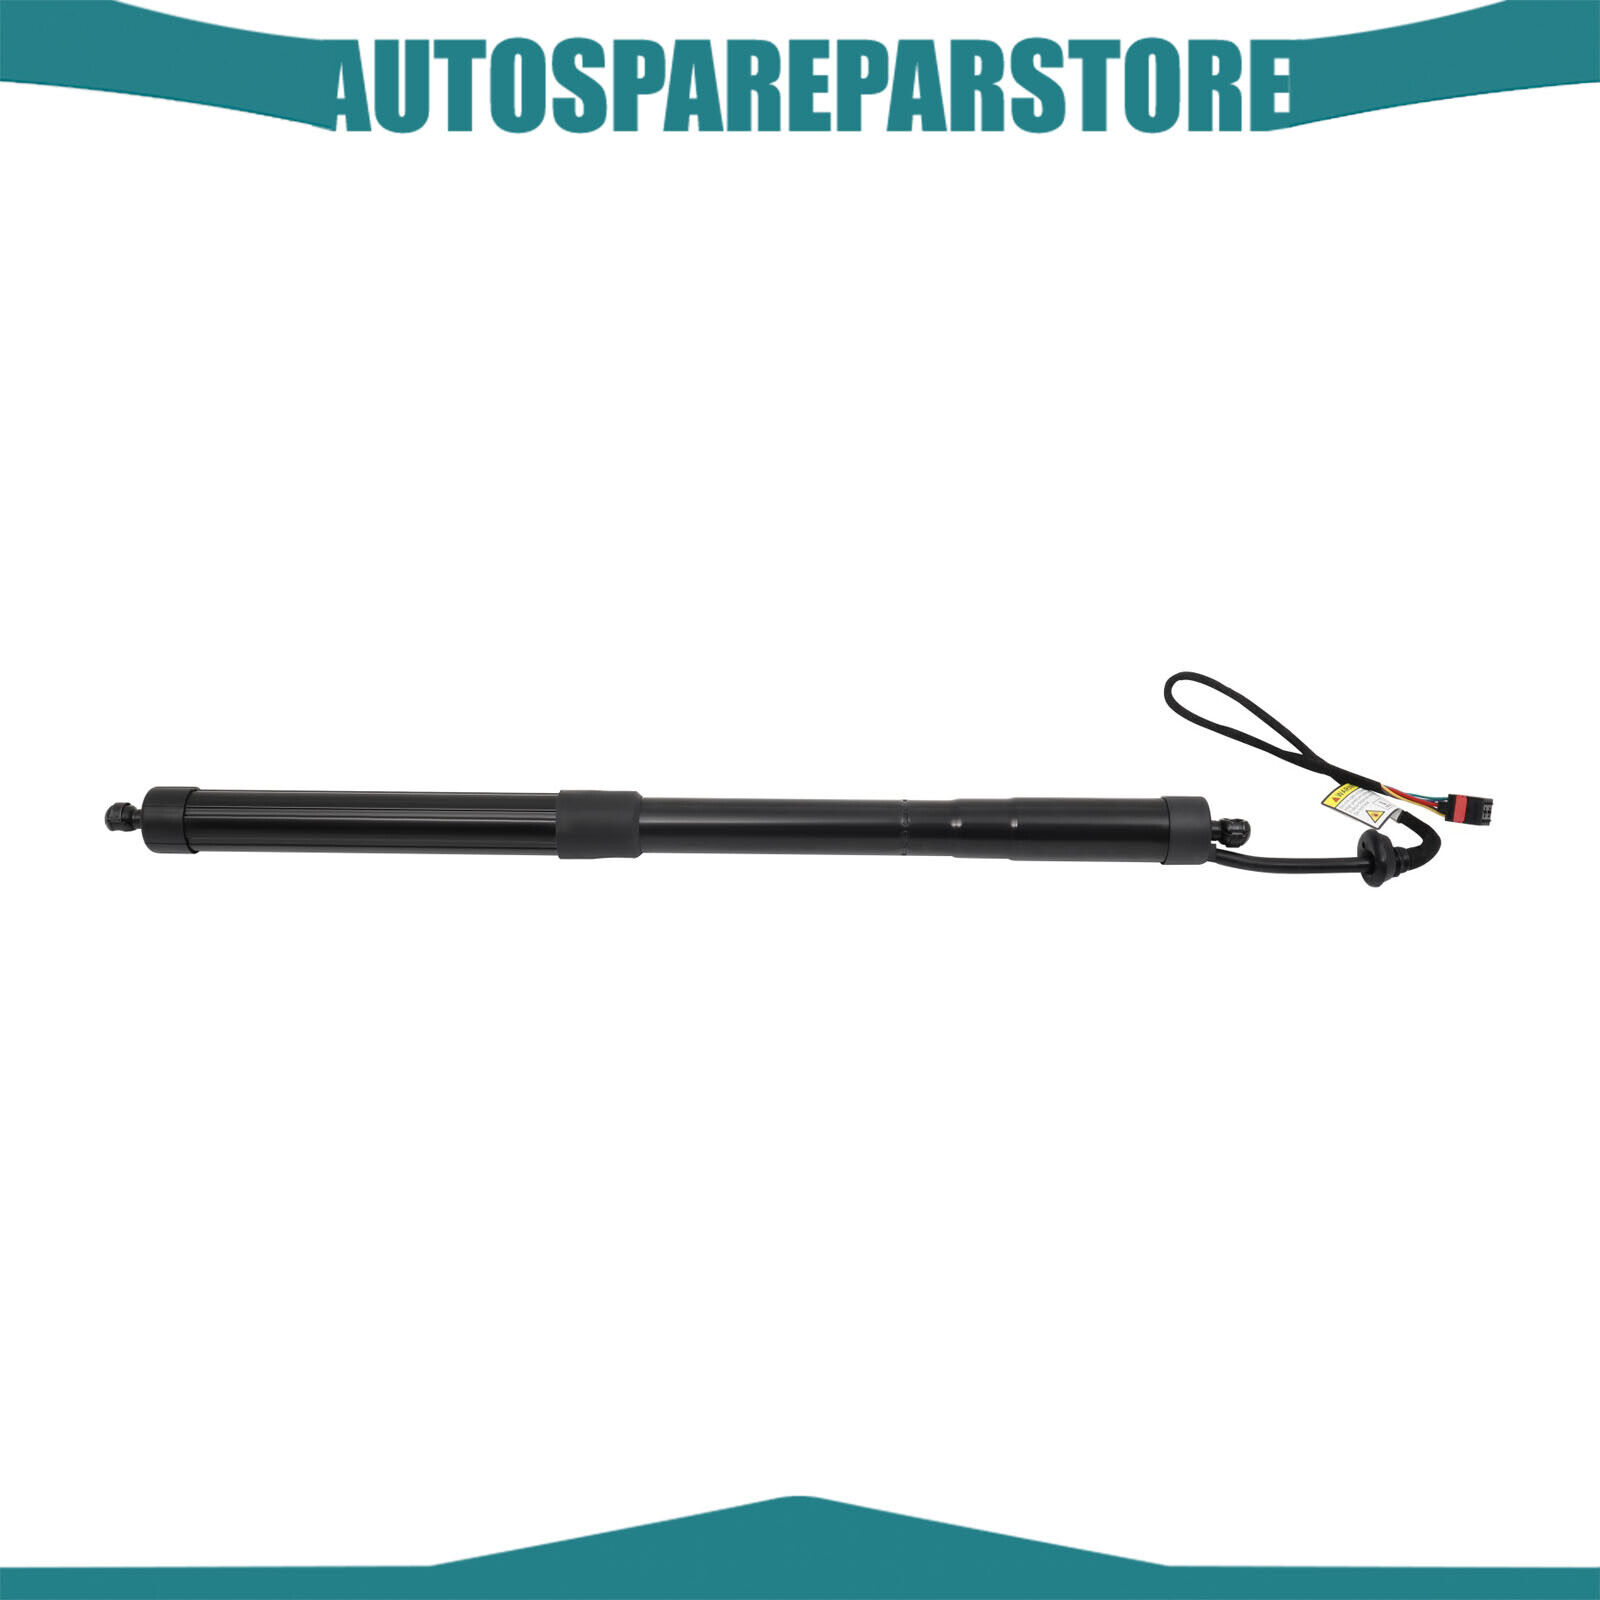 1x Rear For 2010 VW Sharan 7n1 Tailgate Power Lift Supports Gas Prop Springs